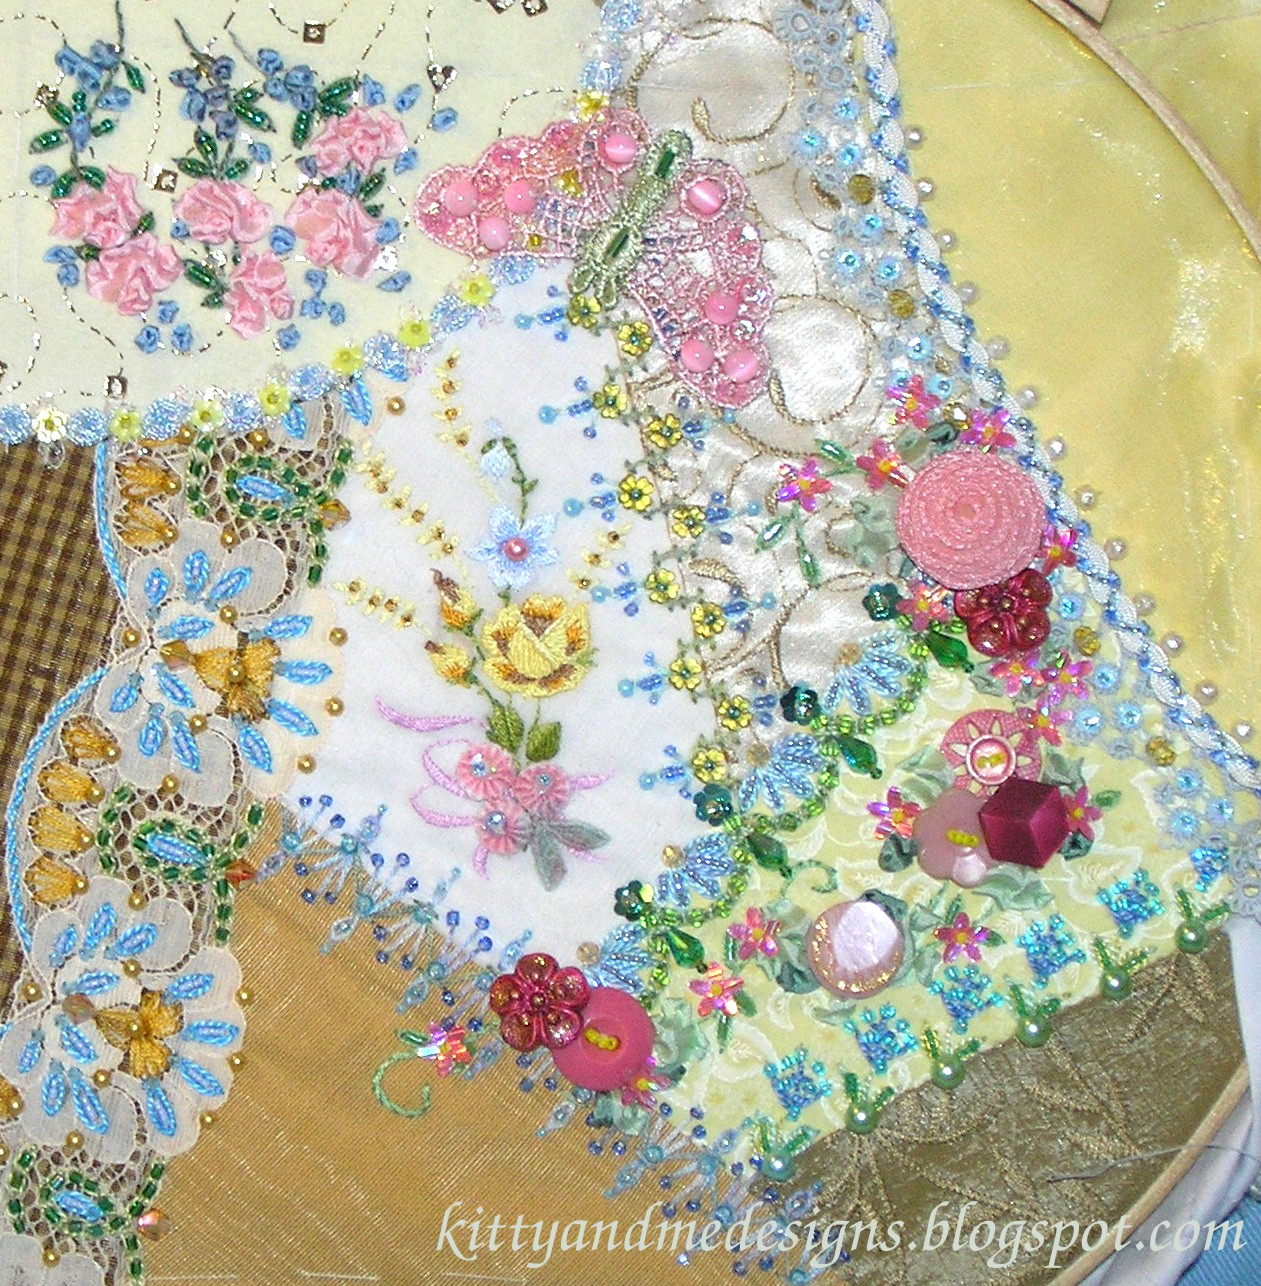 Ribbon Embroidery Flowers Patterns Kitty And Me Designs Silk Ribbon Embroidery Easy Rose Tutorial